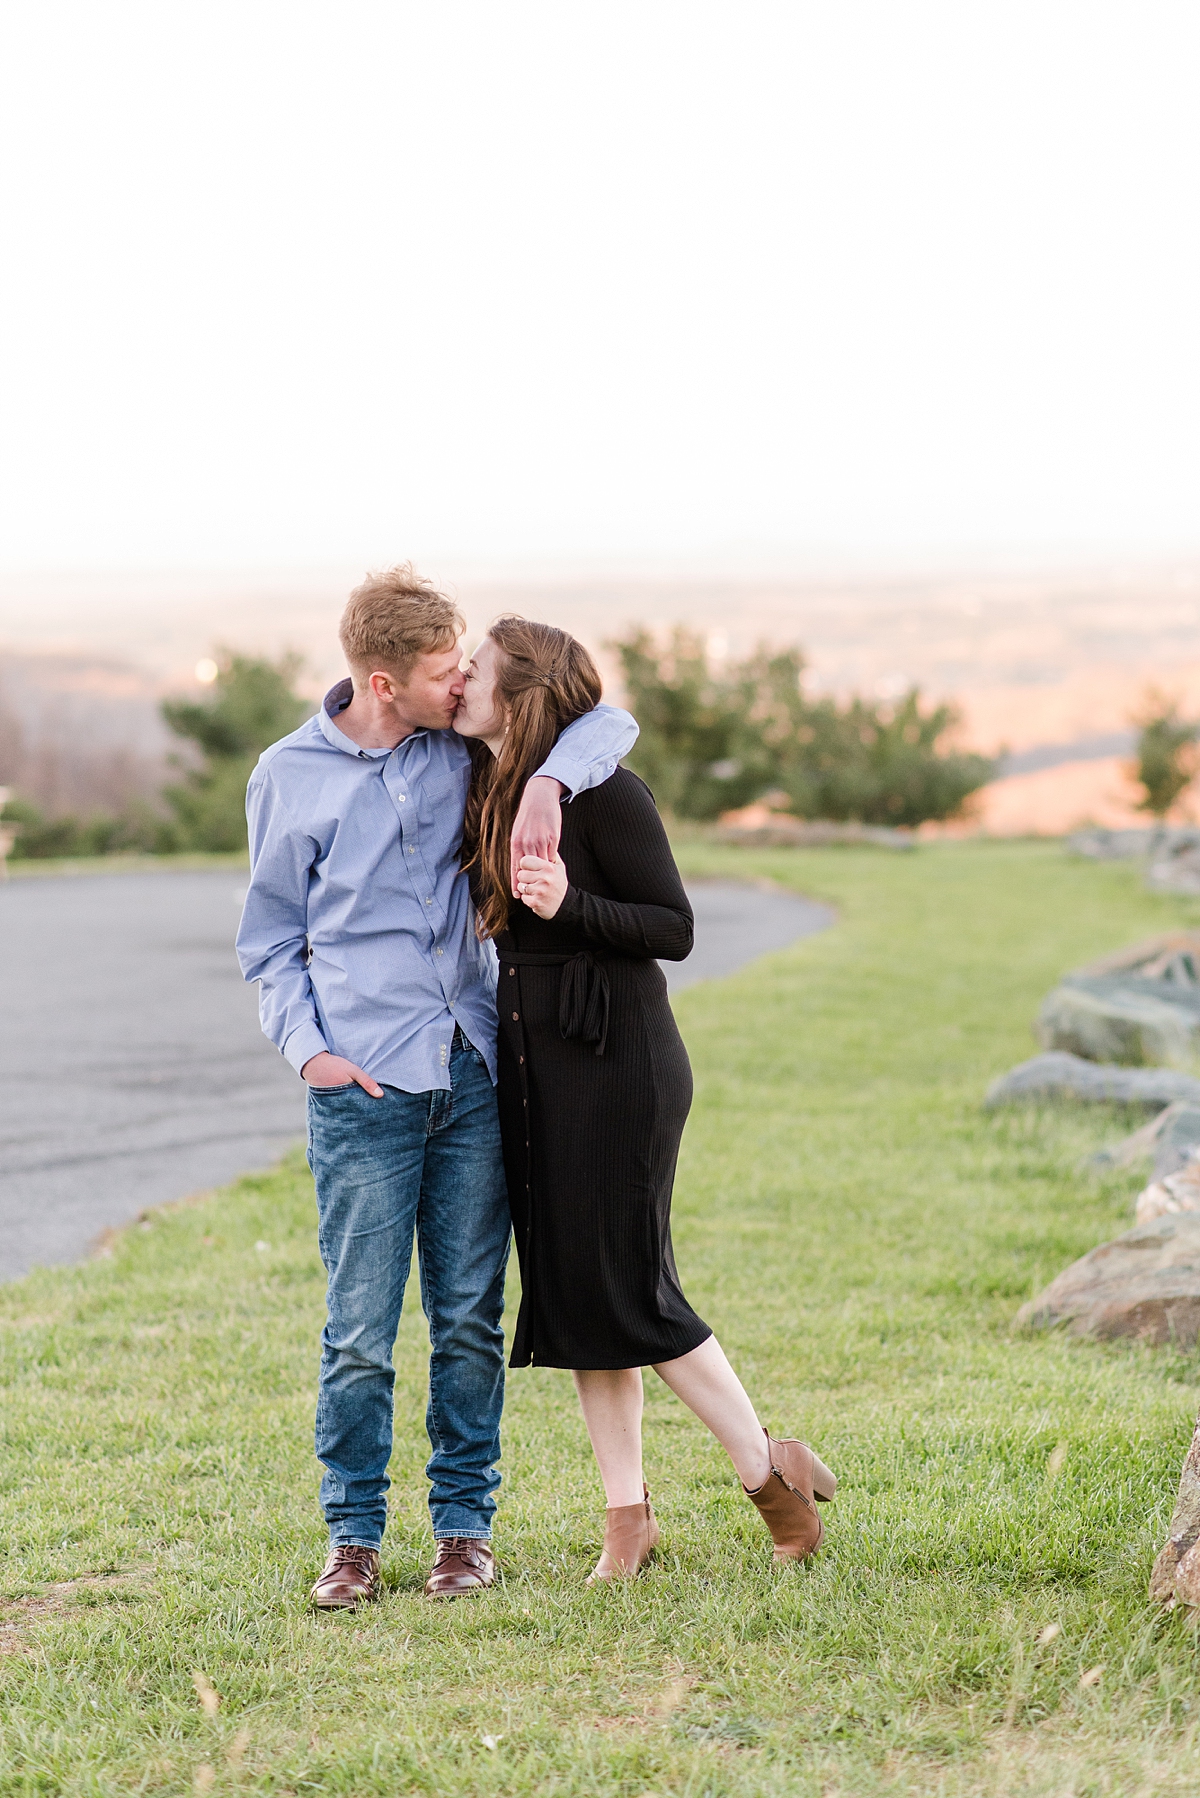 Mountain View at Fall Rockfish Gap Overlook Engagement Session. Photography by Richmond Wedding Photographer Kailey Brianne Photography.